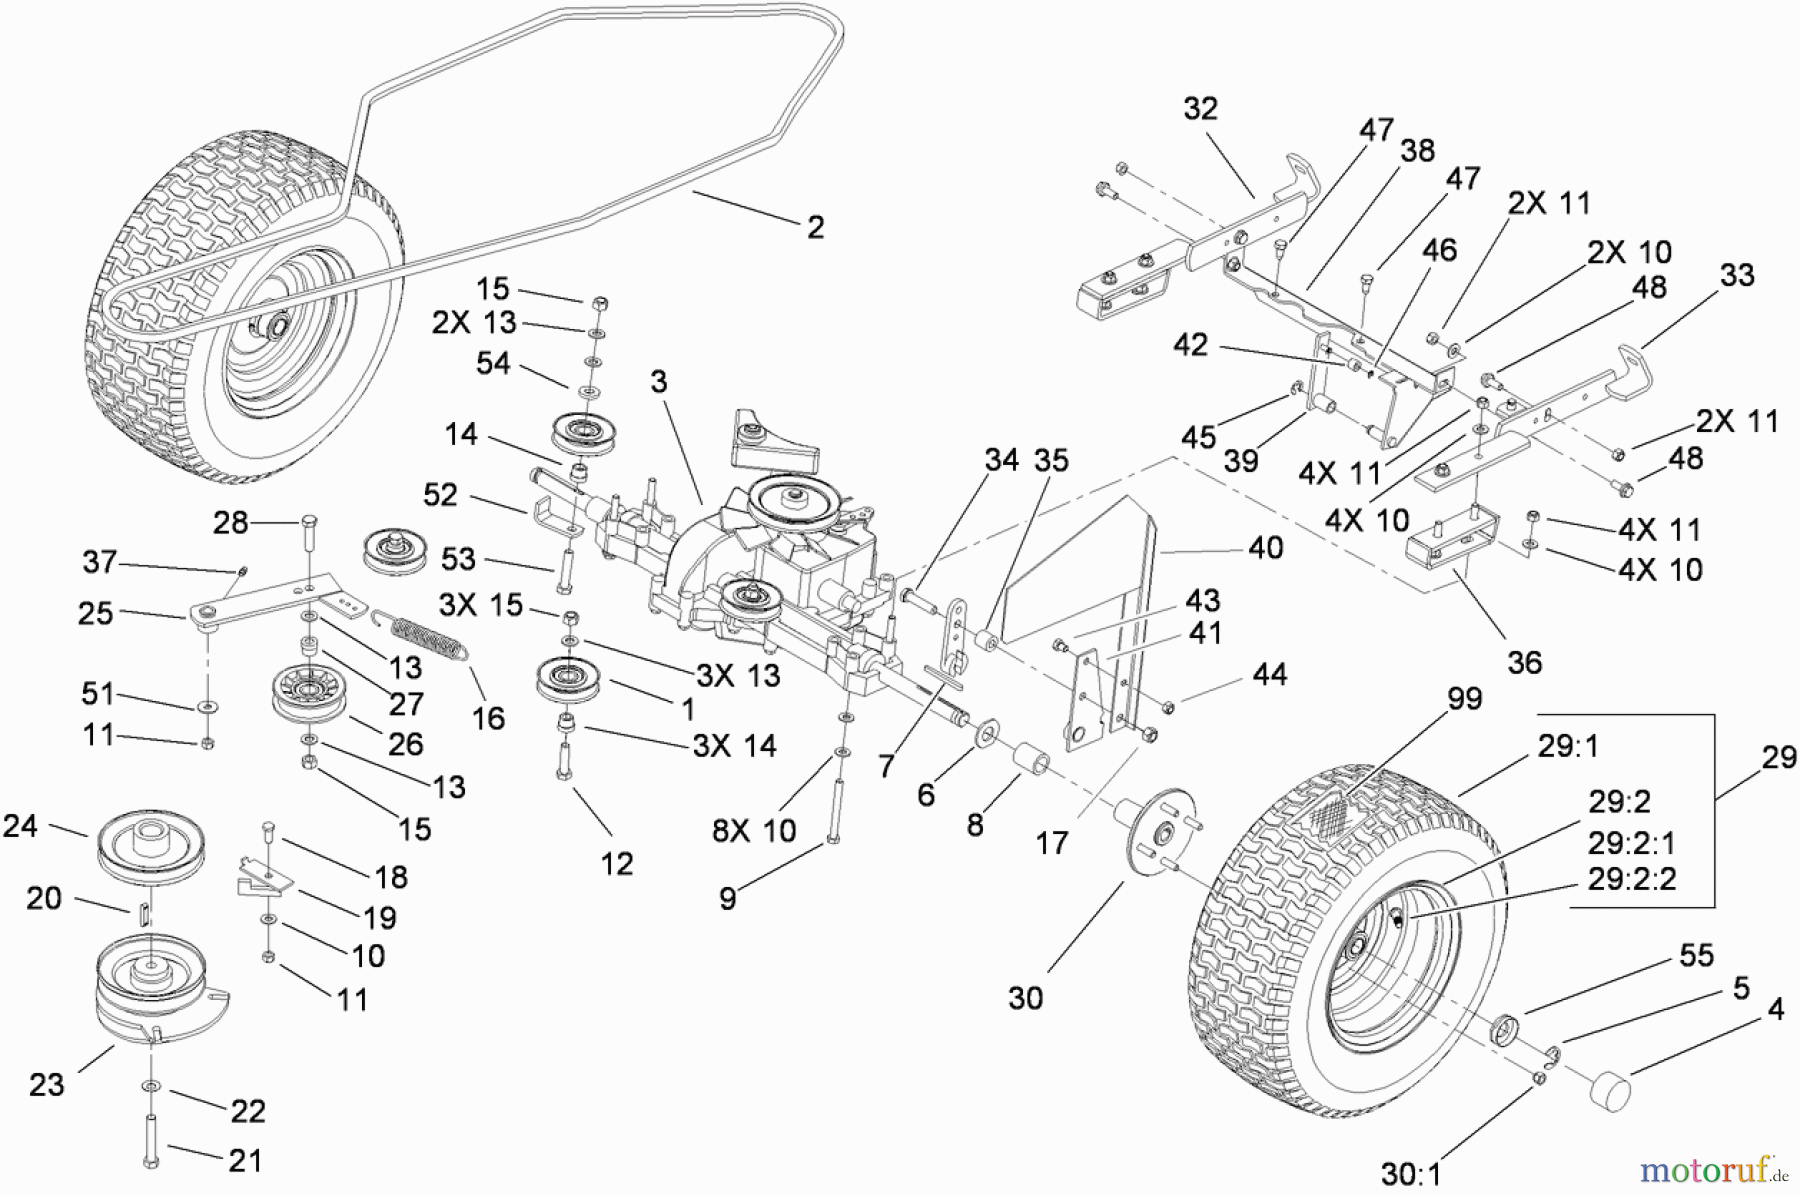  Toro Neu Mowers, Lawn & Garden Tractor Seite 1 74592 (DH 220) - Toro DH 220 Lawn Tractor, 2008 (280000529-280999999) TRANSMISSION ASSEMBLY